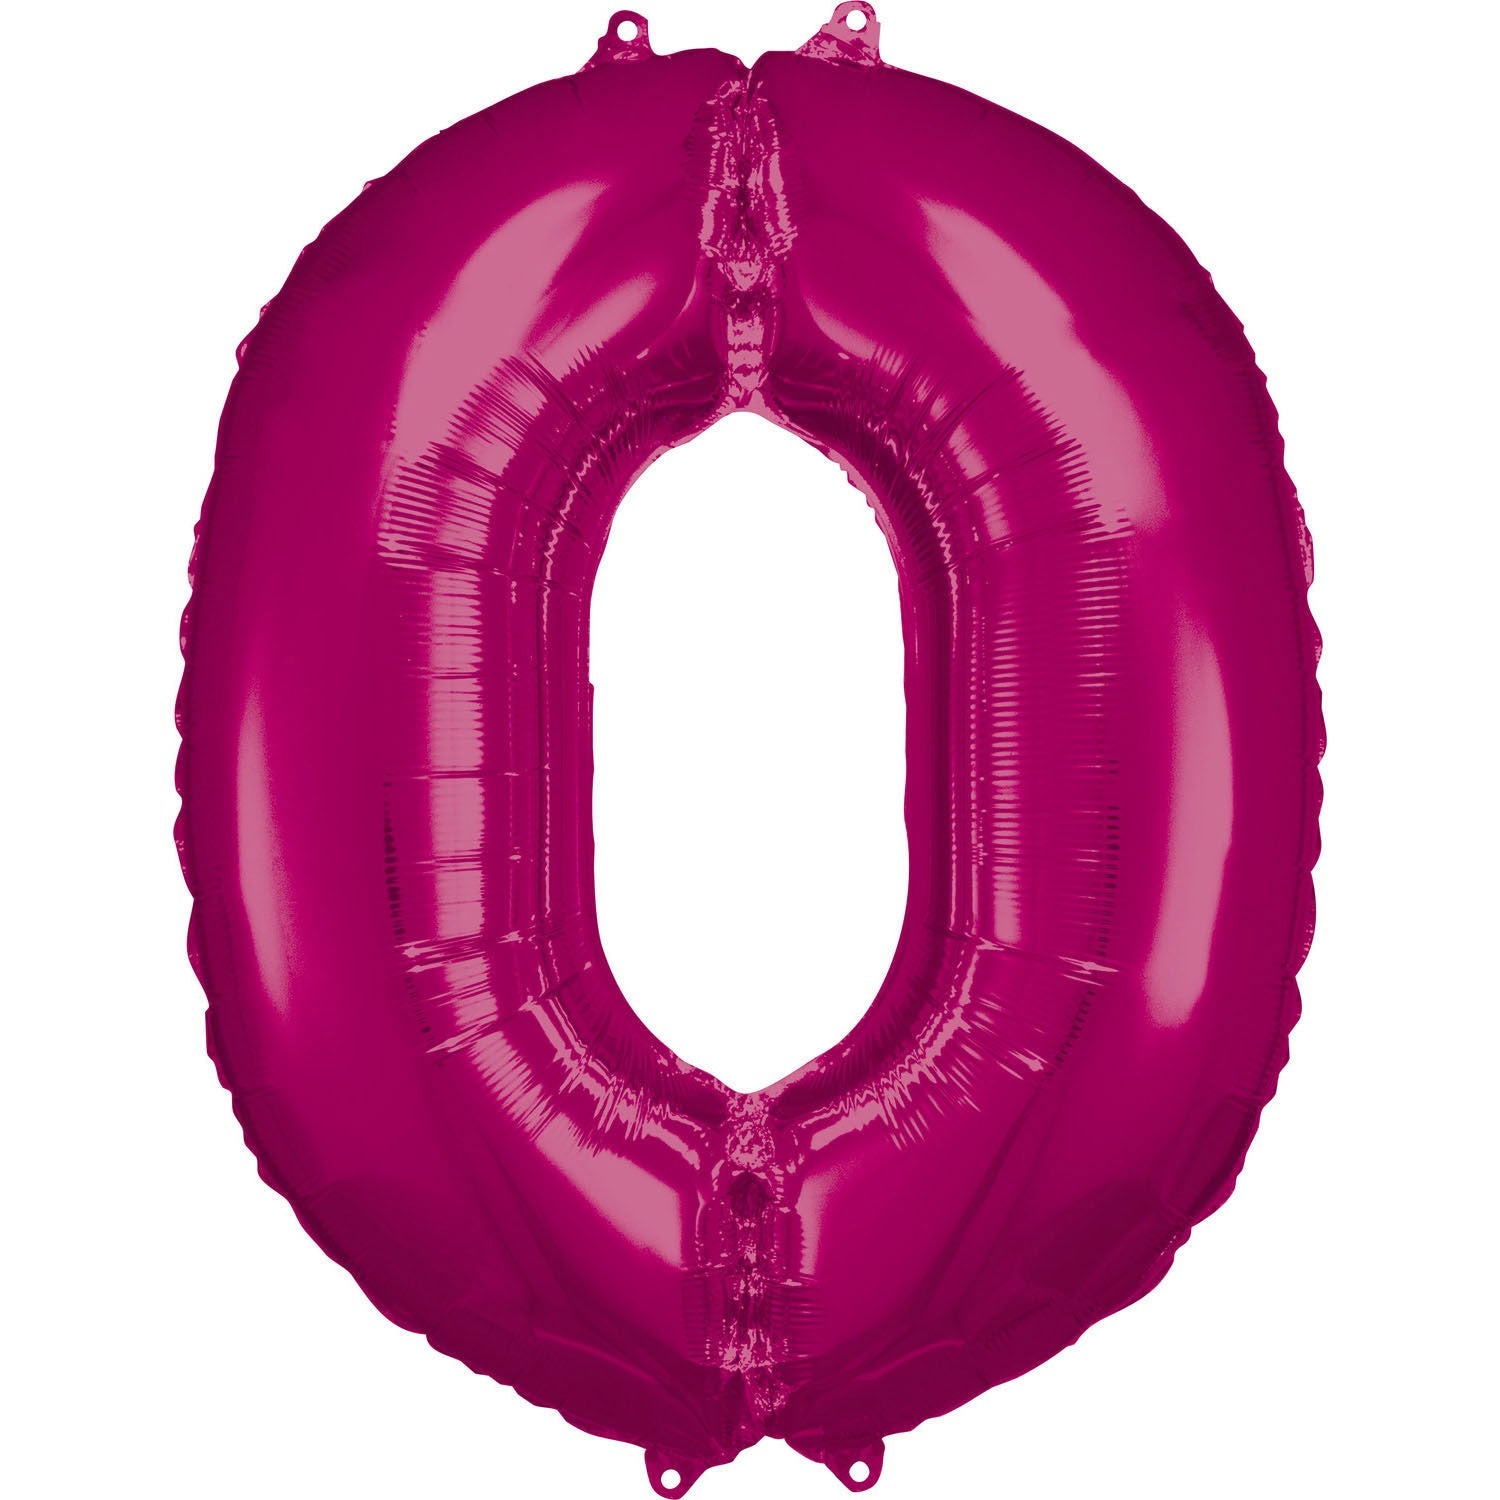 Pink Supershape Number 0 Foil Balloon 88cm (34in) height by 66cm (25in) width Balloon is sold uninflated. Can be inflated with air or helium.